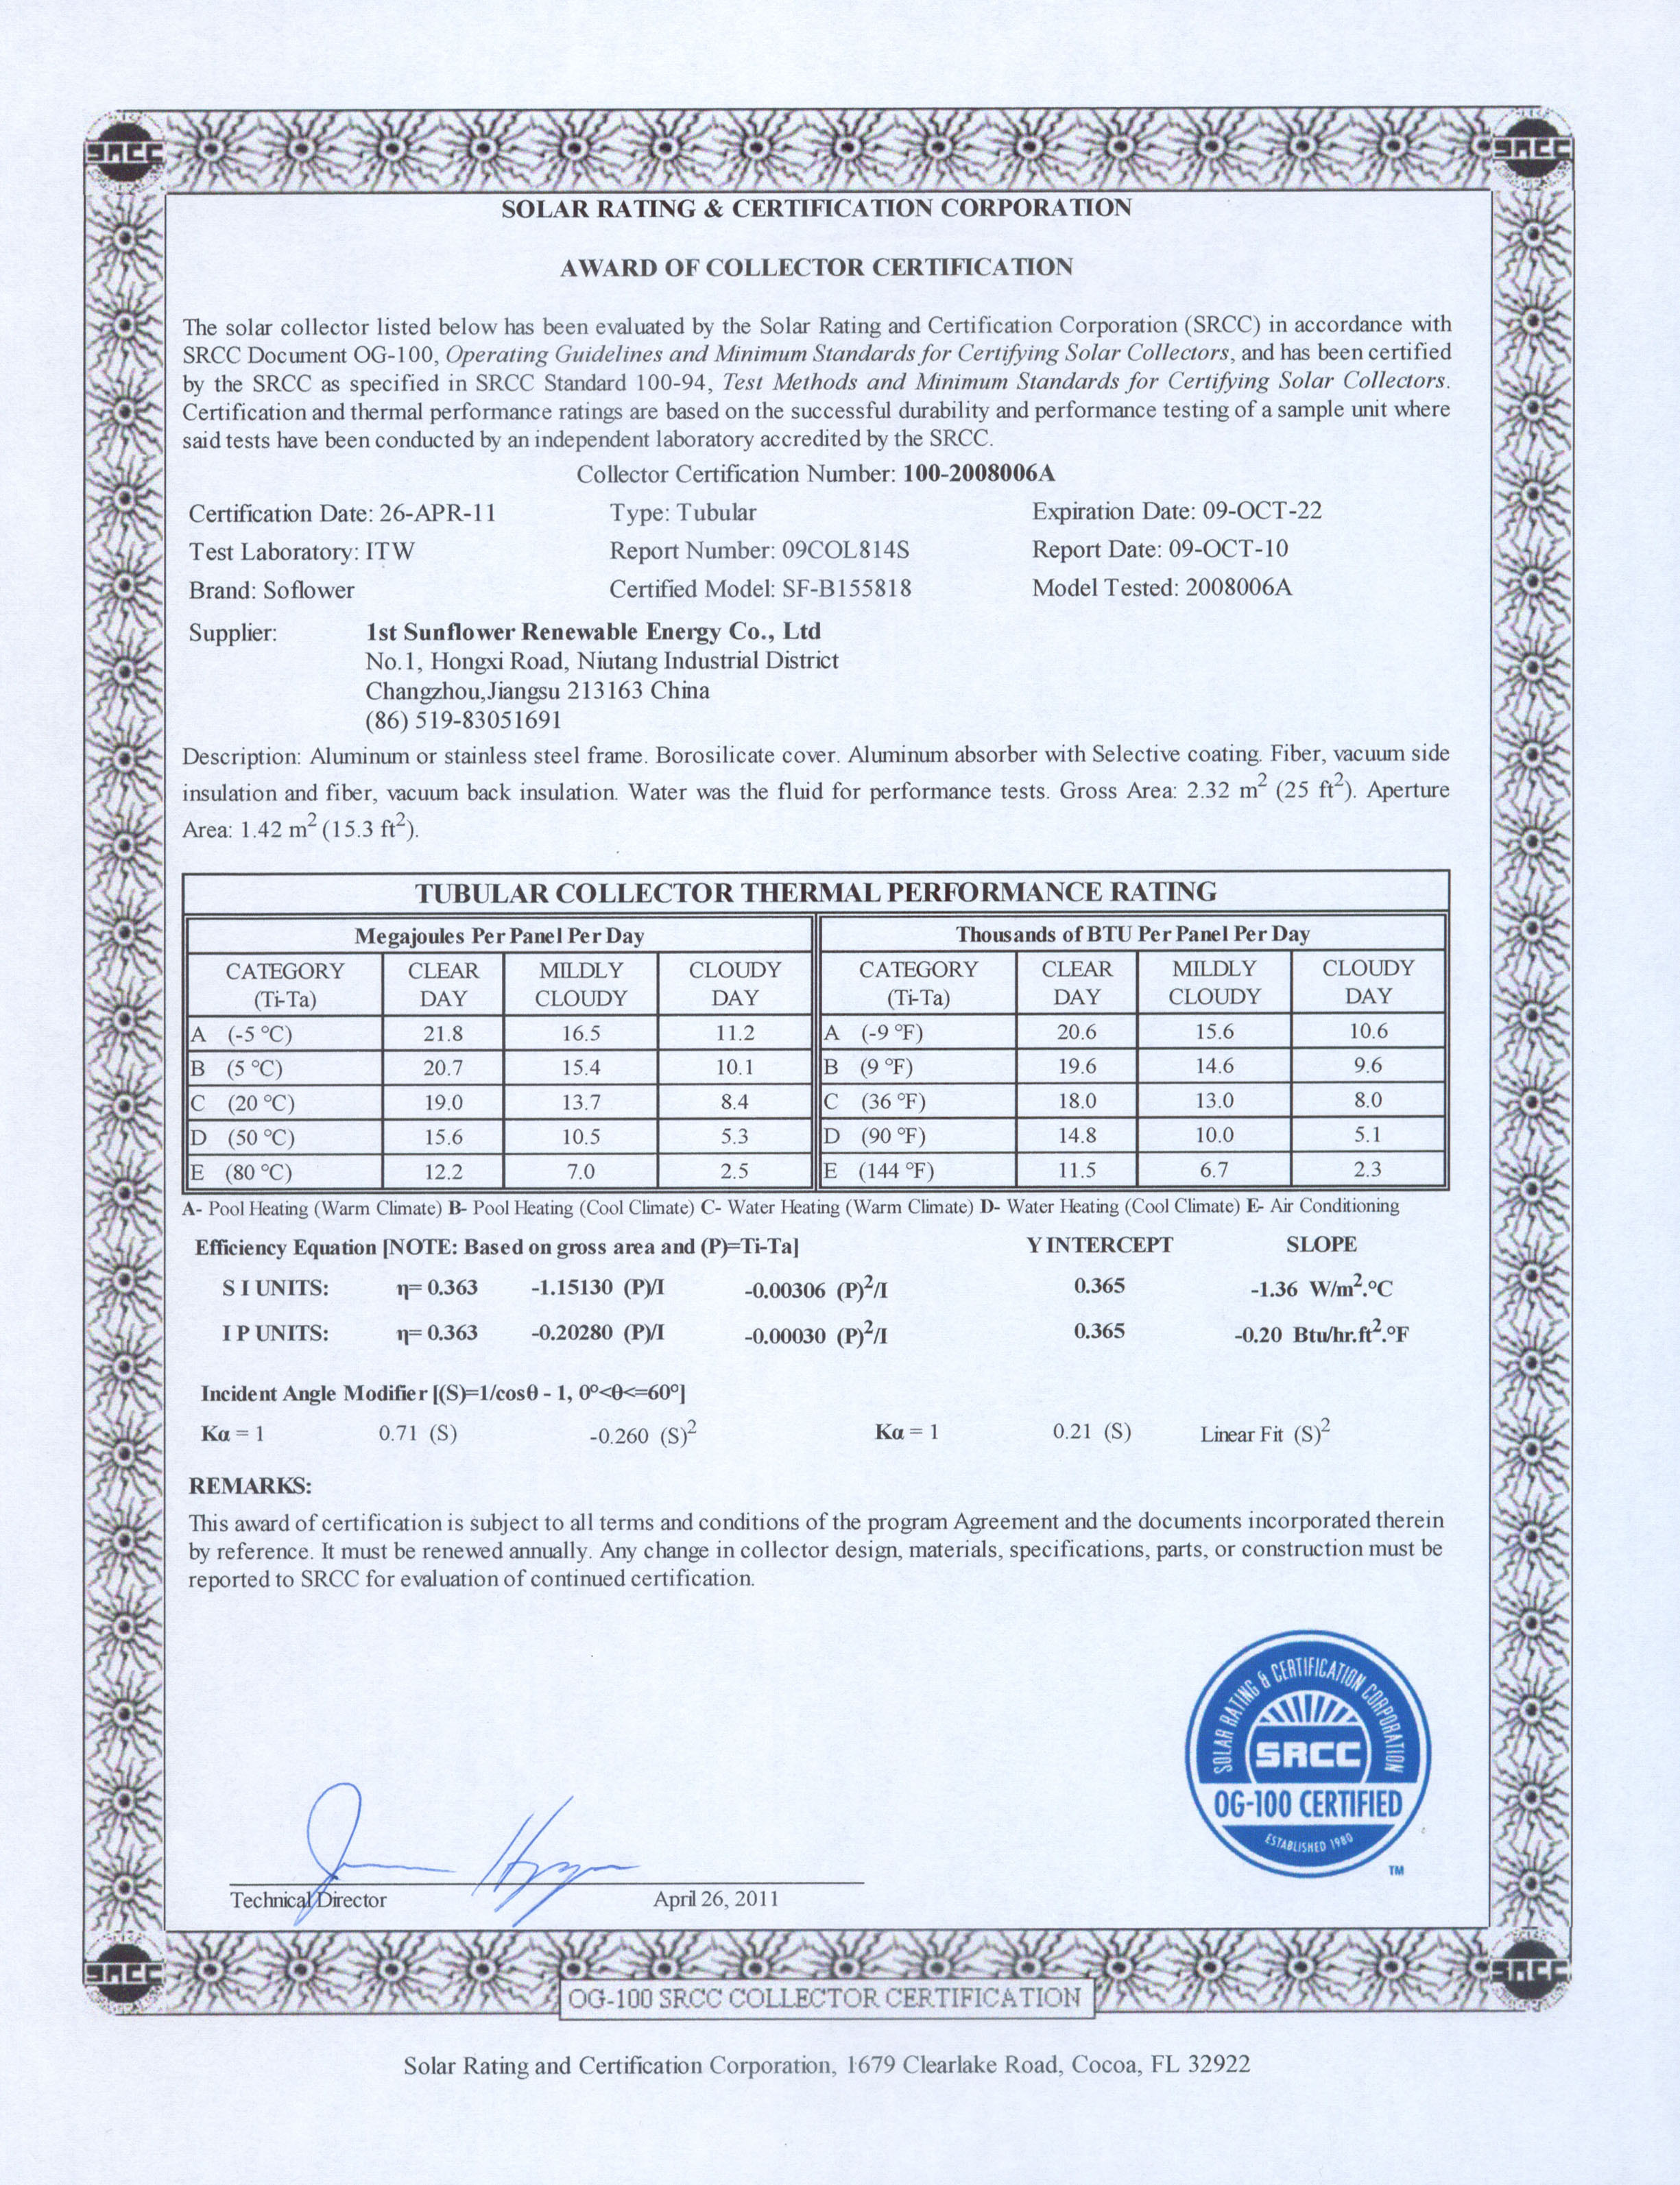 SF-B155818 SRCC certificate from ITW lab